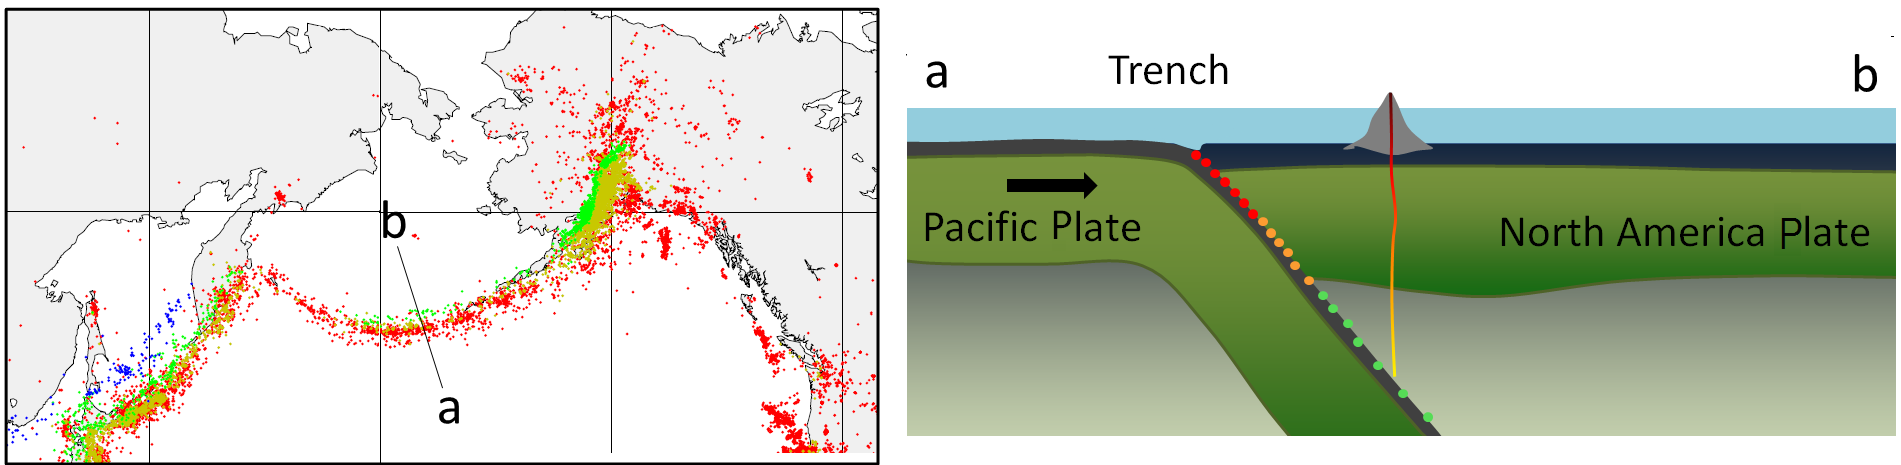 Figure on left shows how earthquakes get deeper further inland from a trench. Figure on the right shows the Pacific Plate subducting under the North American Plate and a volcanic island being created inward of the subduction zone.